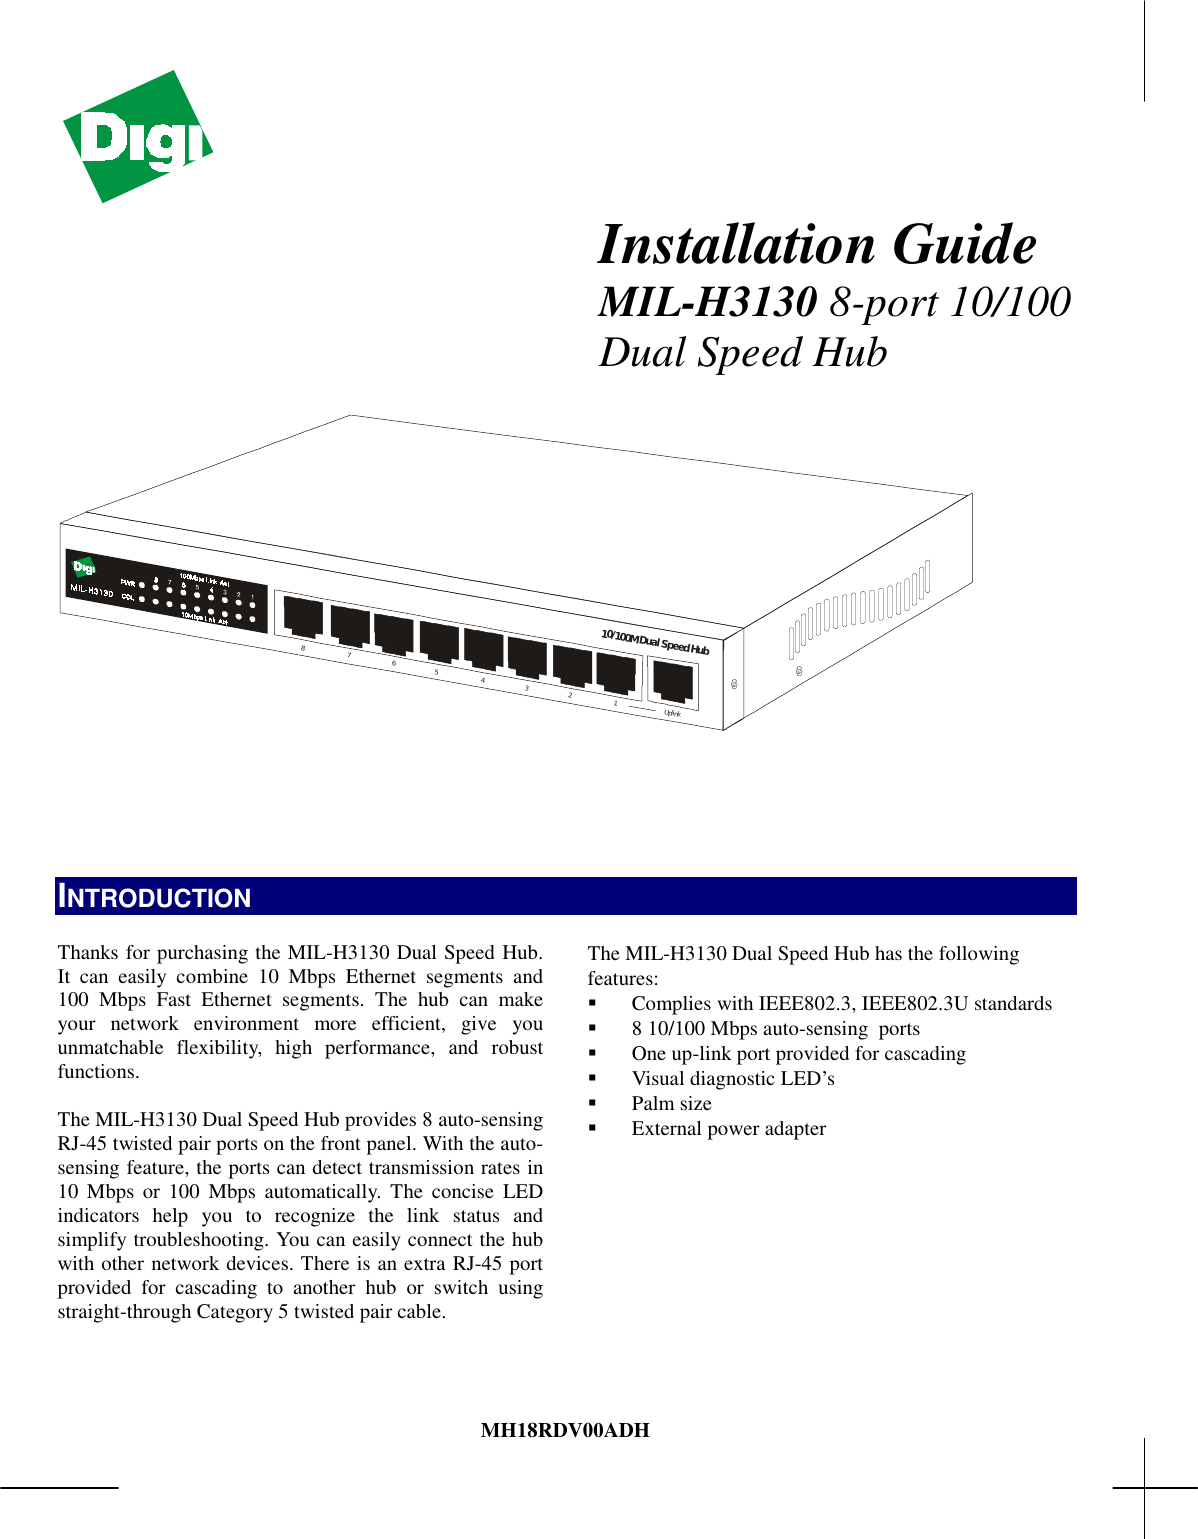 Page 1 of 5 - Digi Digi-Mil-H3130-Users-Manual- Congratulations On Your Purchase Of A 8/16-port Dual Speed Hub  Digi-mil-h3130-users-manual